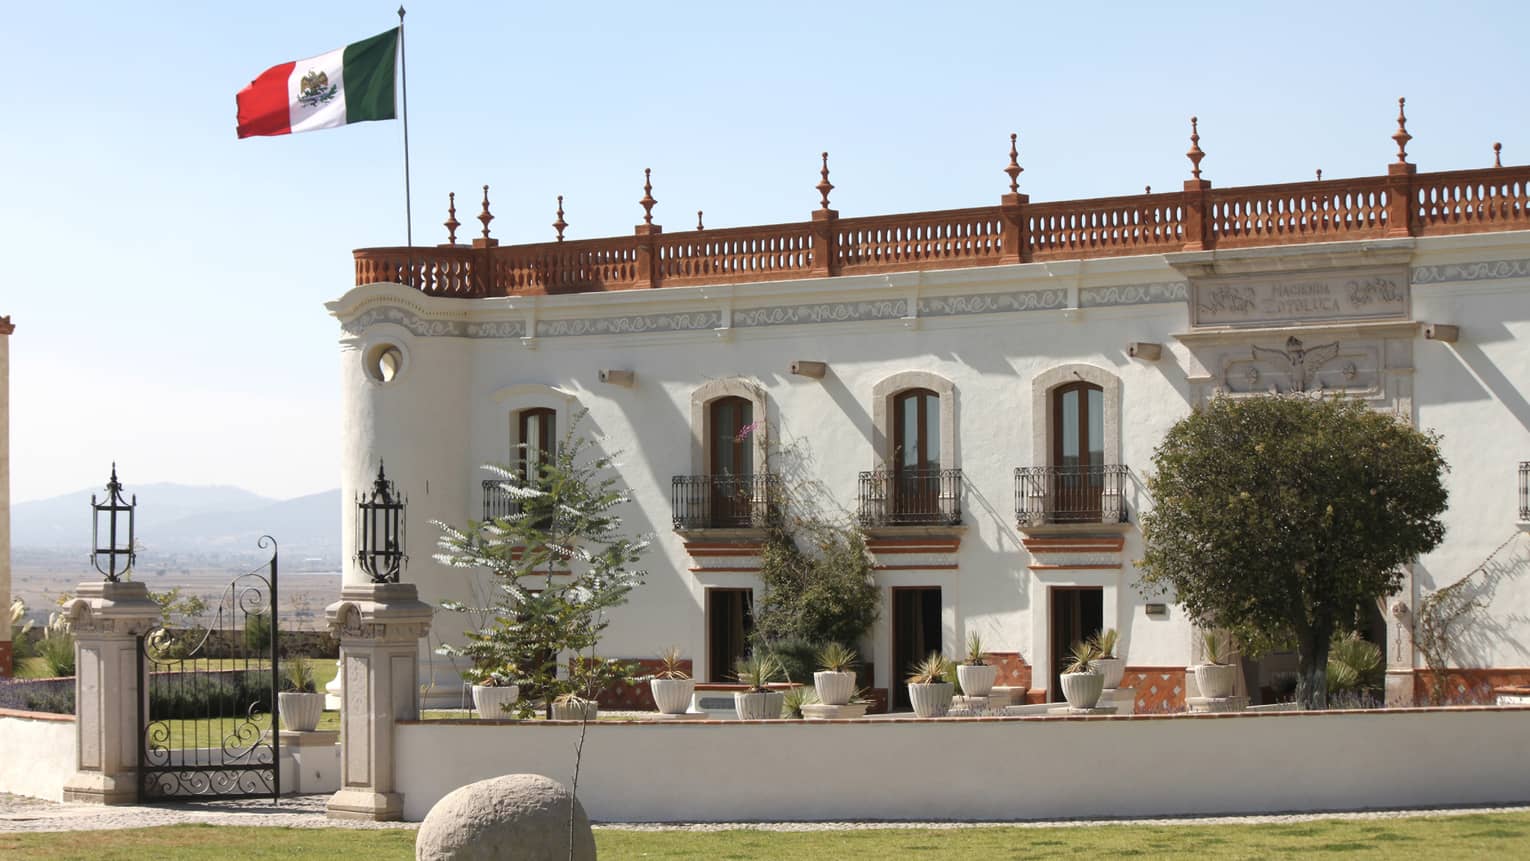 Grand estate side view with white stucco walls and Juliet balconies, crowned with russet railings and a waving Mexican flag.